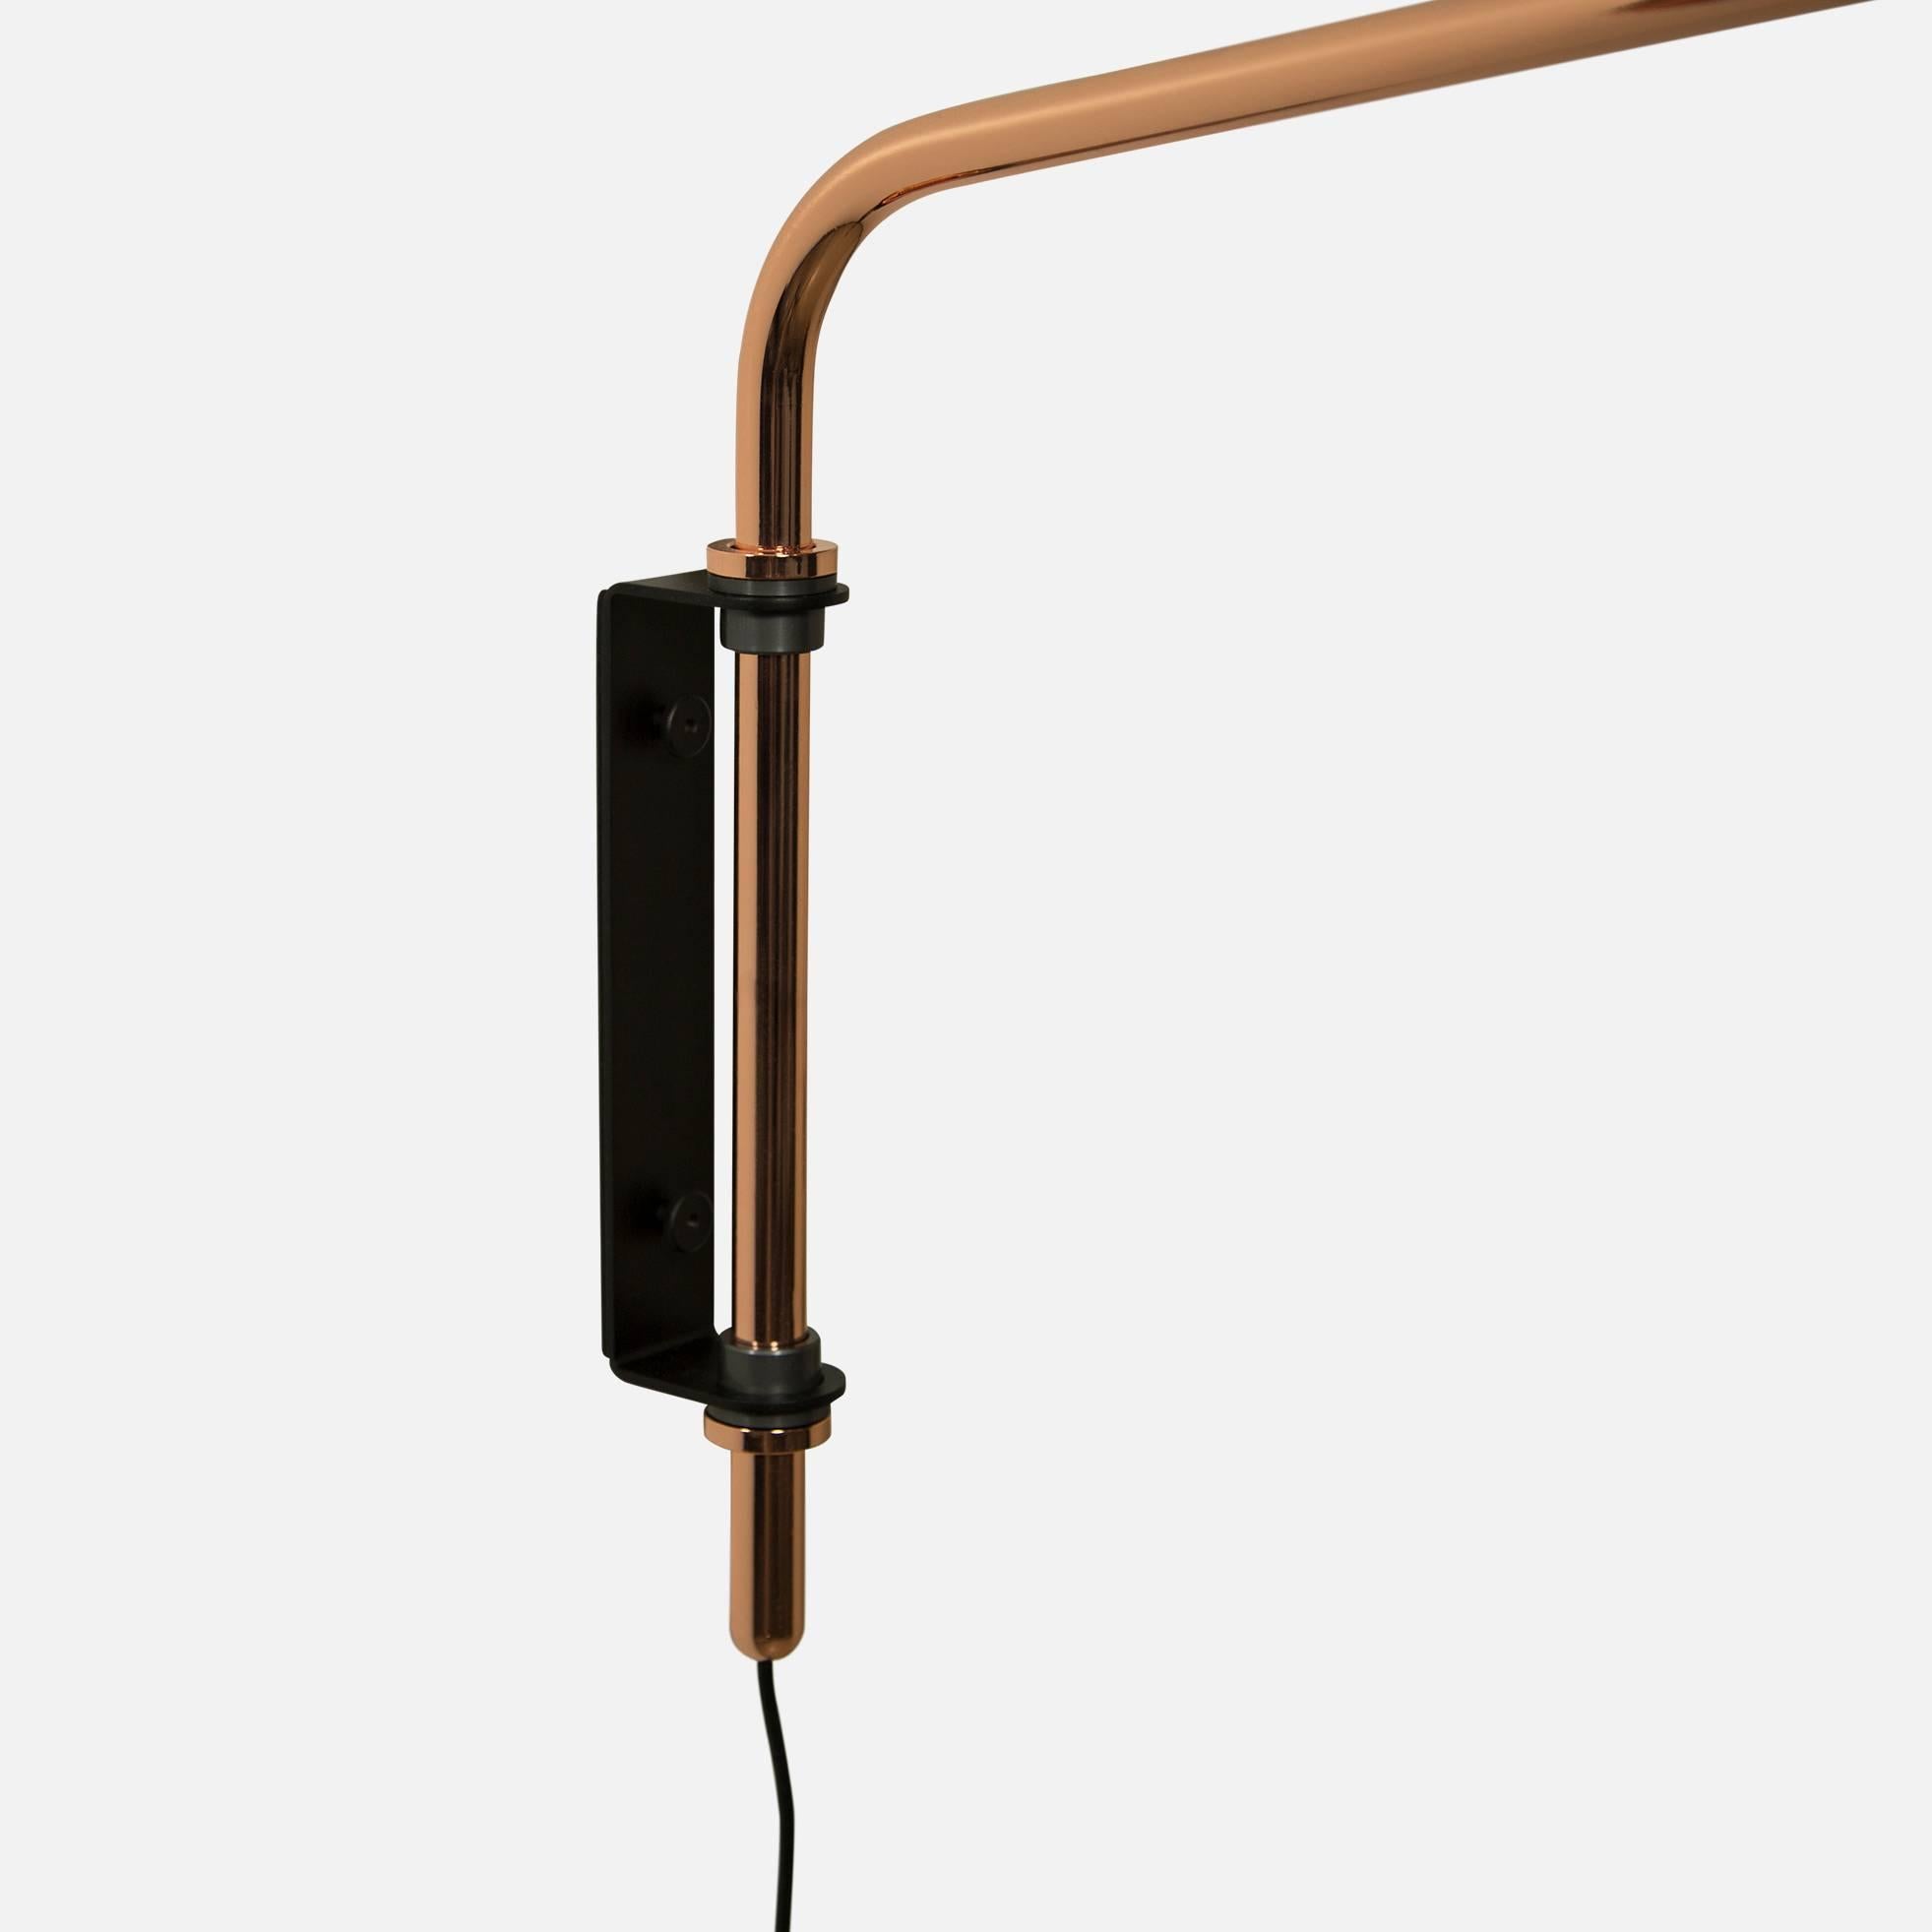 American Signal Swing Arm Sconce in Copper, Long, from Souda, in Stock